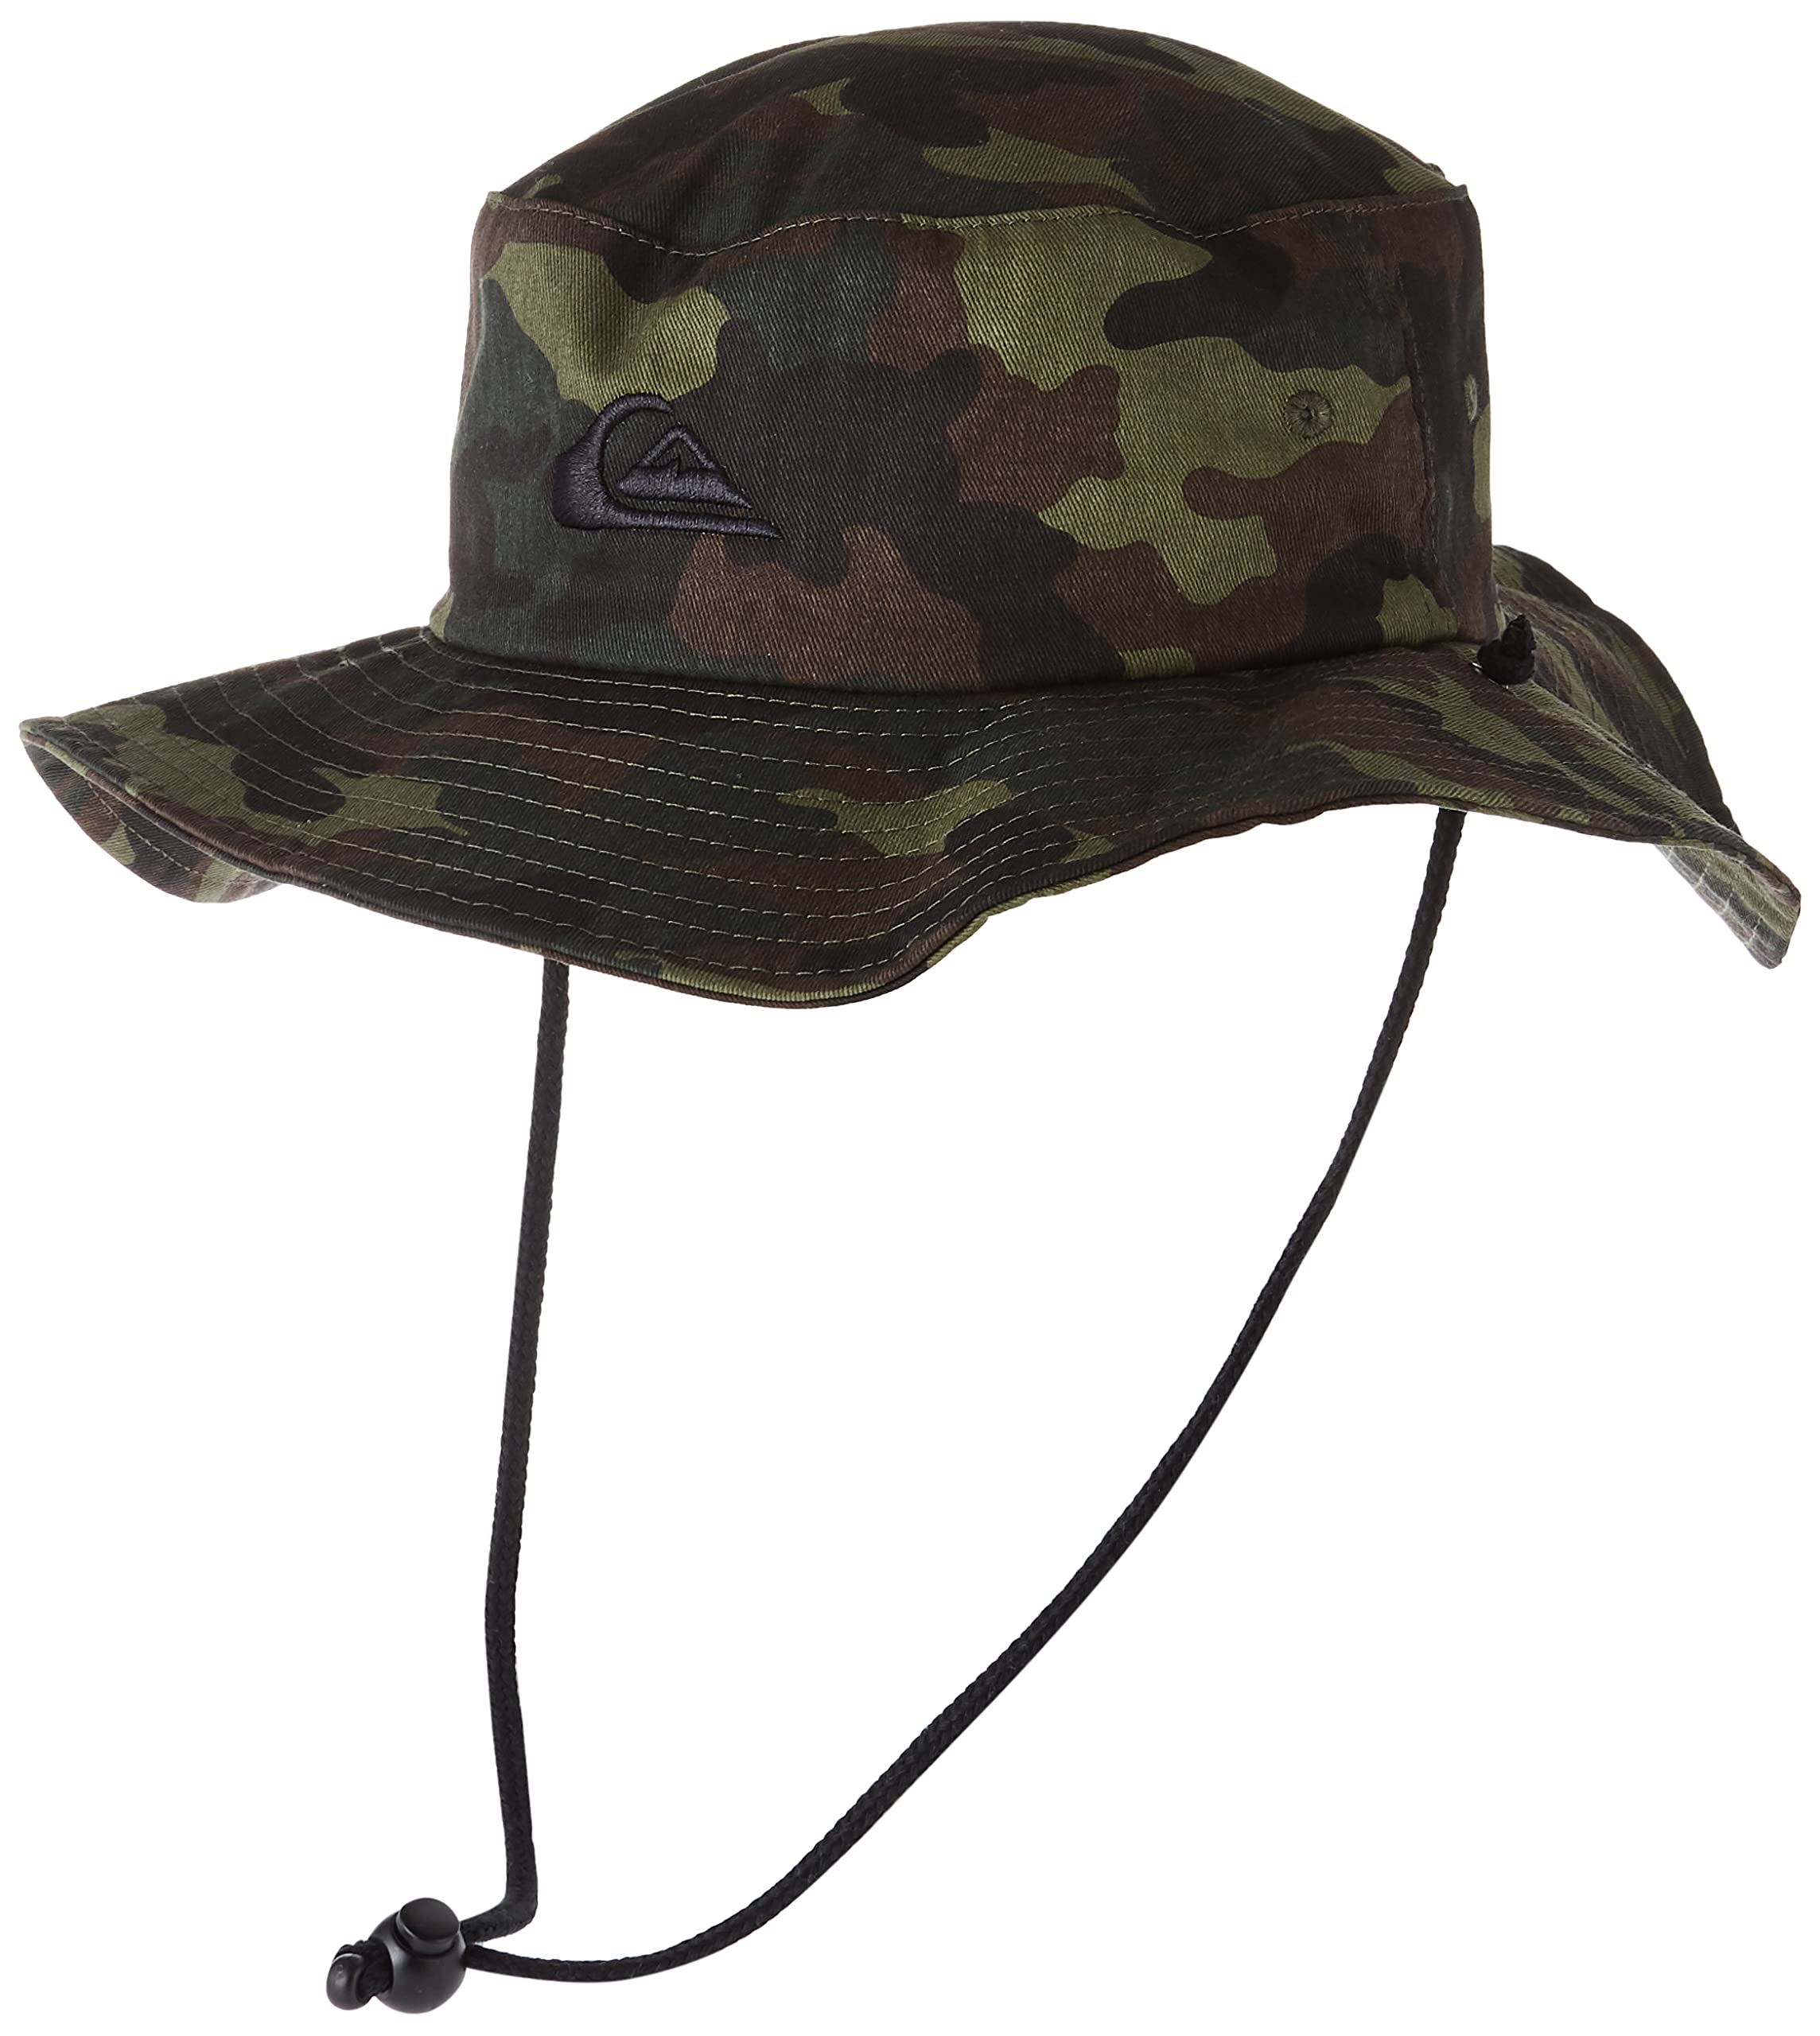 Quiksilver Men's Bushmaster Bucket Hat (Camo, S/M or XXL) $12.71 + Free Shipping w/ Prime or on $35+